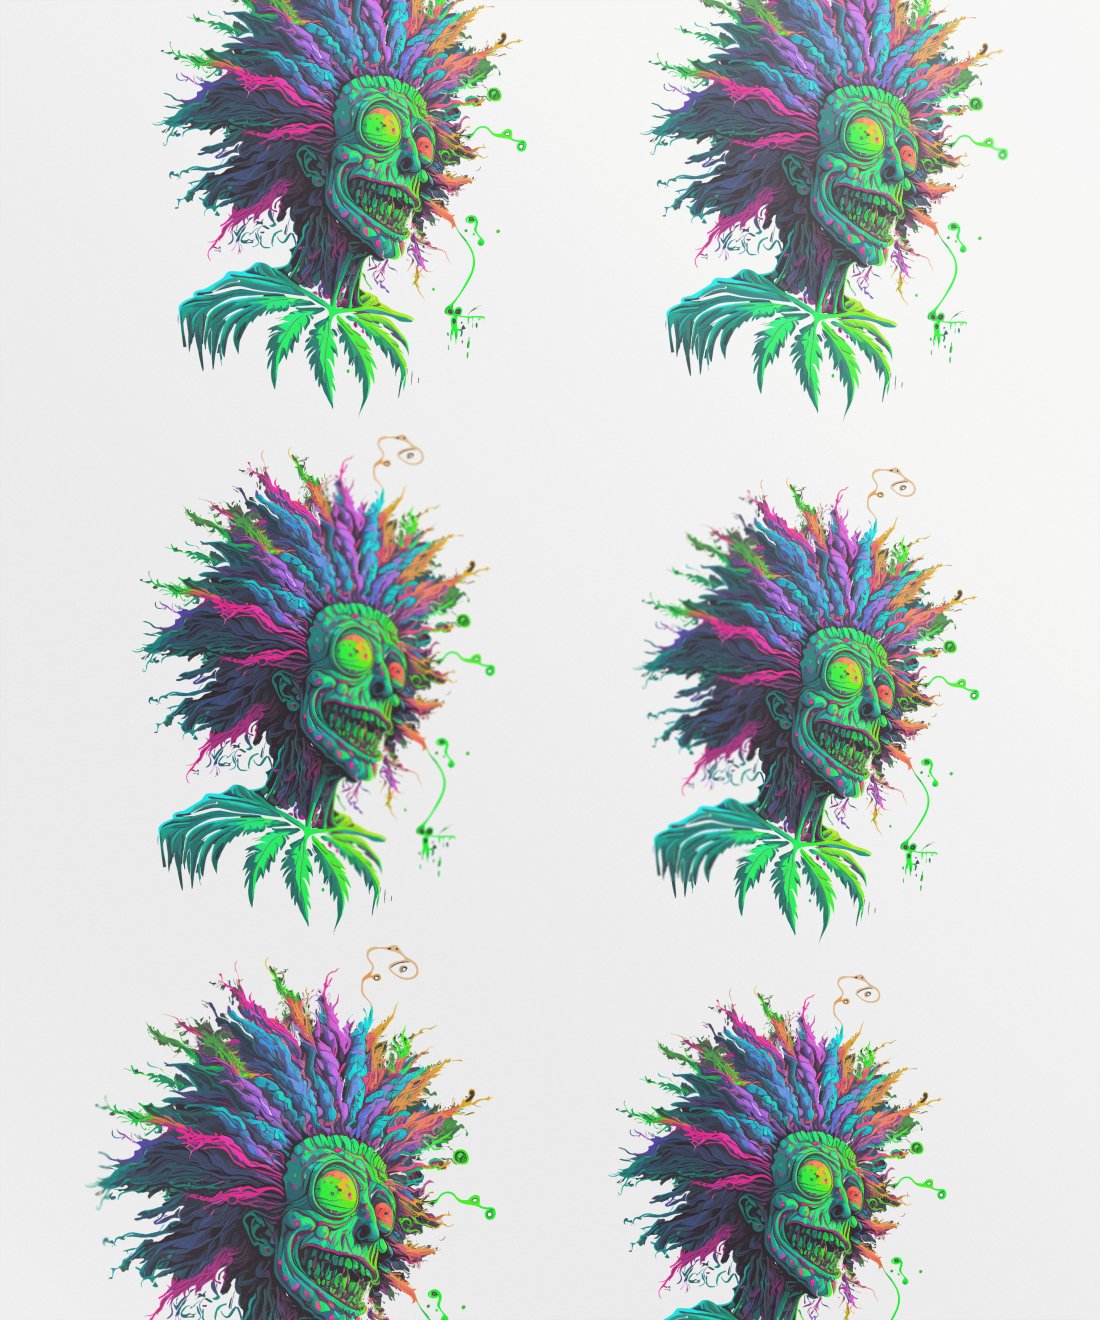 vibrant-skeleton-monster-portrait-with-wild-hairstyle-in-psychedelic-colors - Image 1